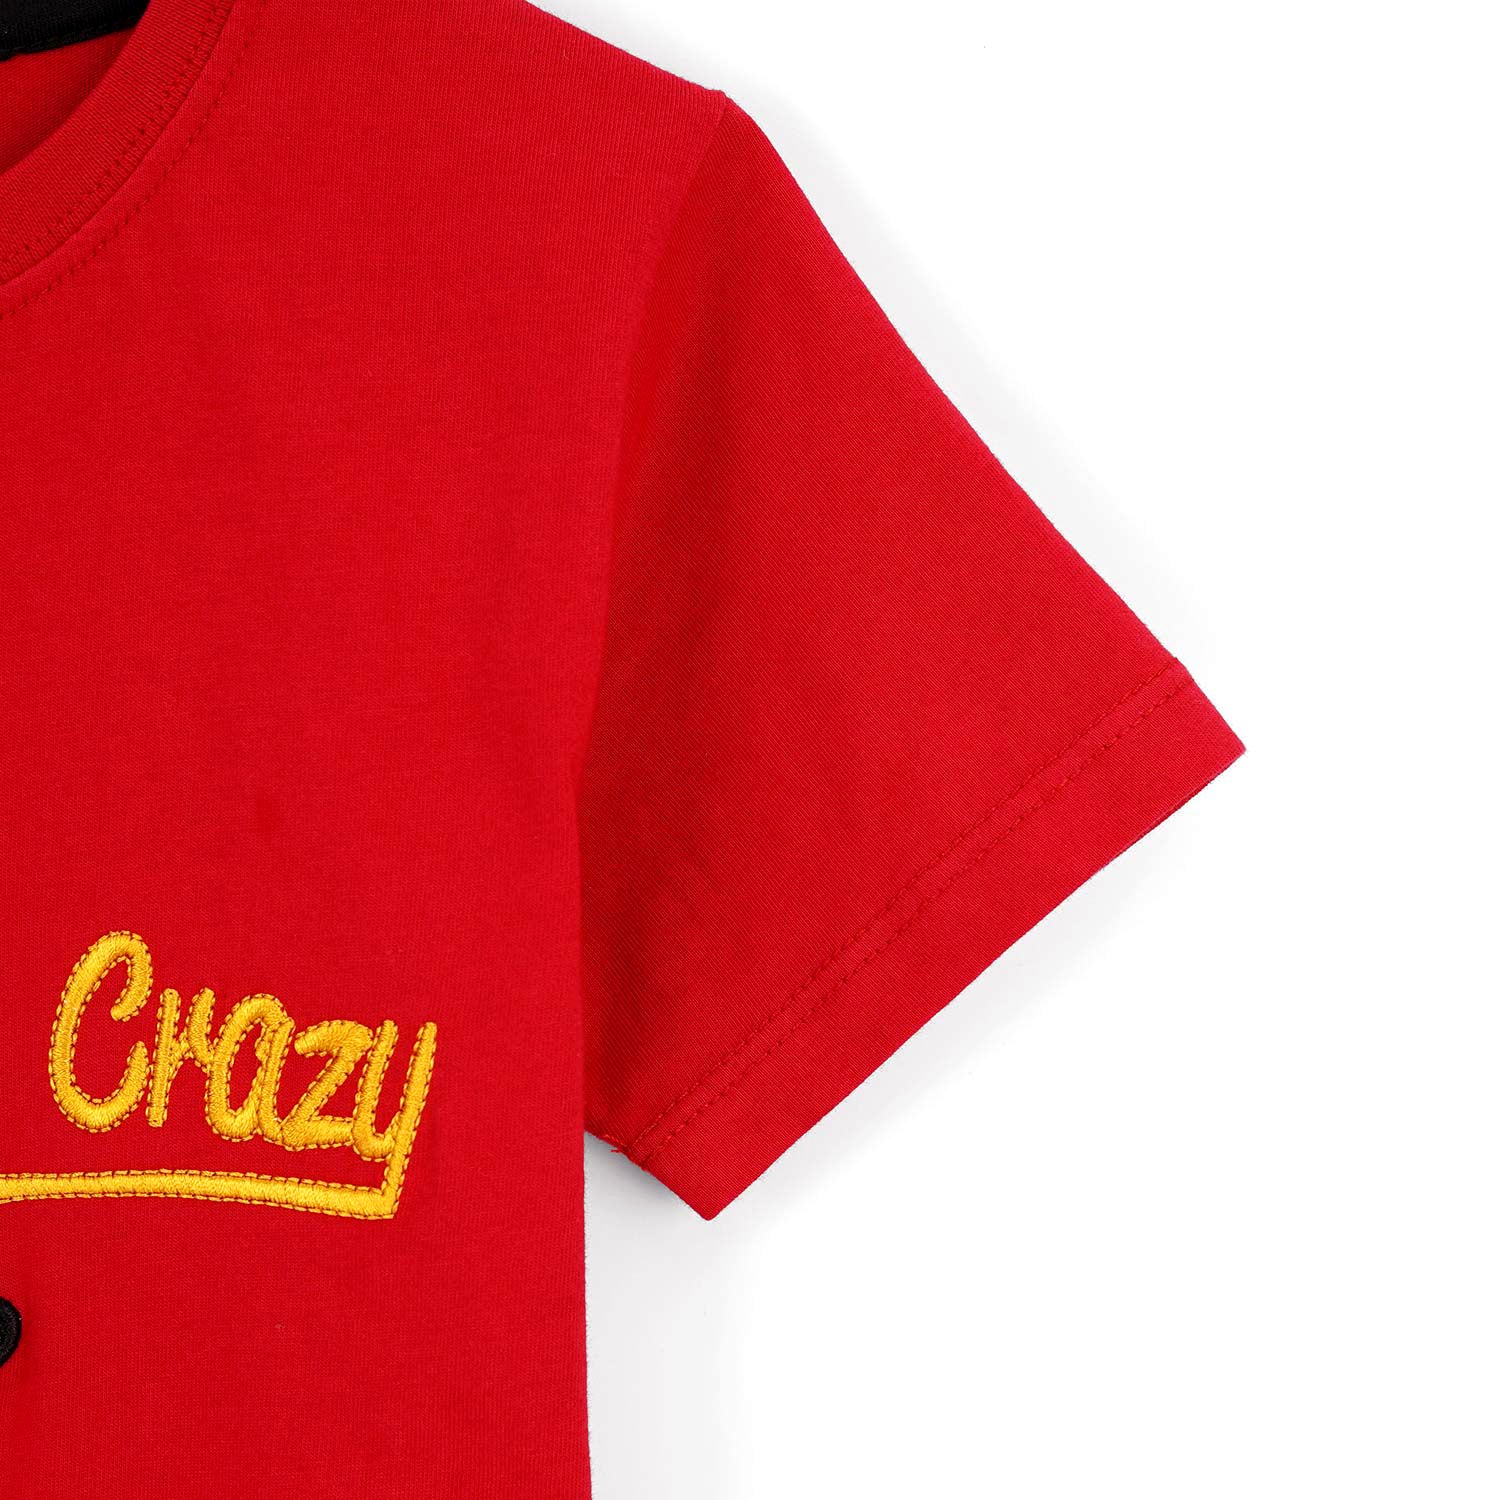 Boys Pure Cotton Embroidered Red T-Shirt